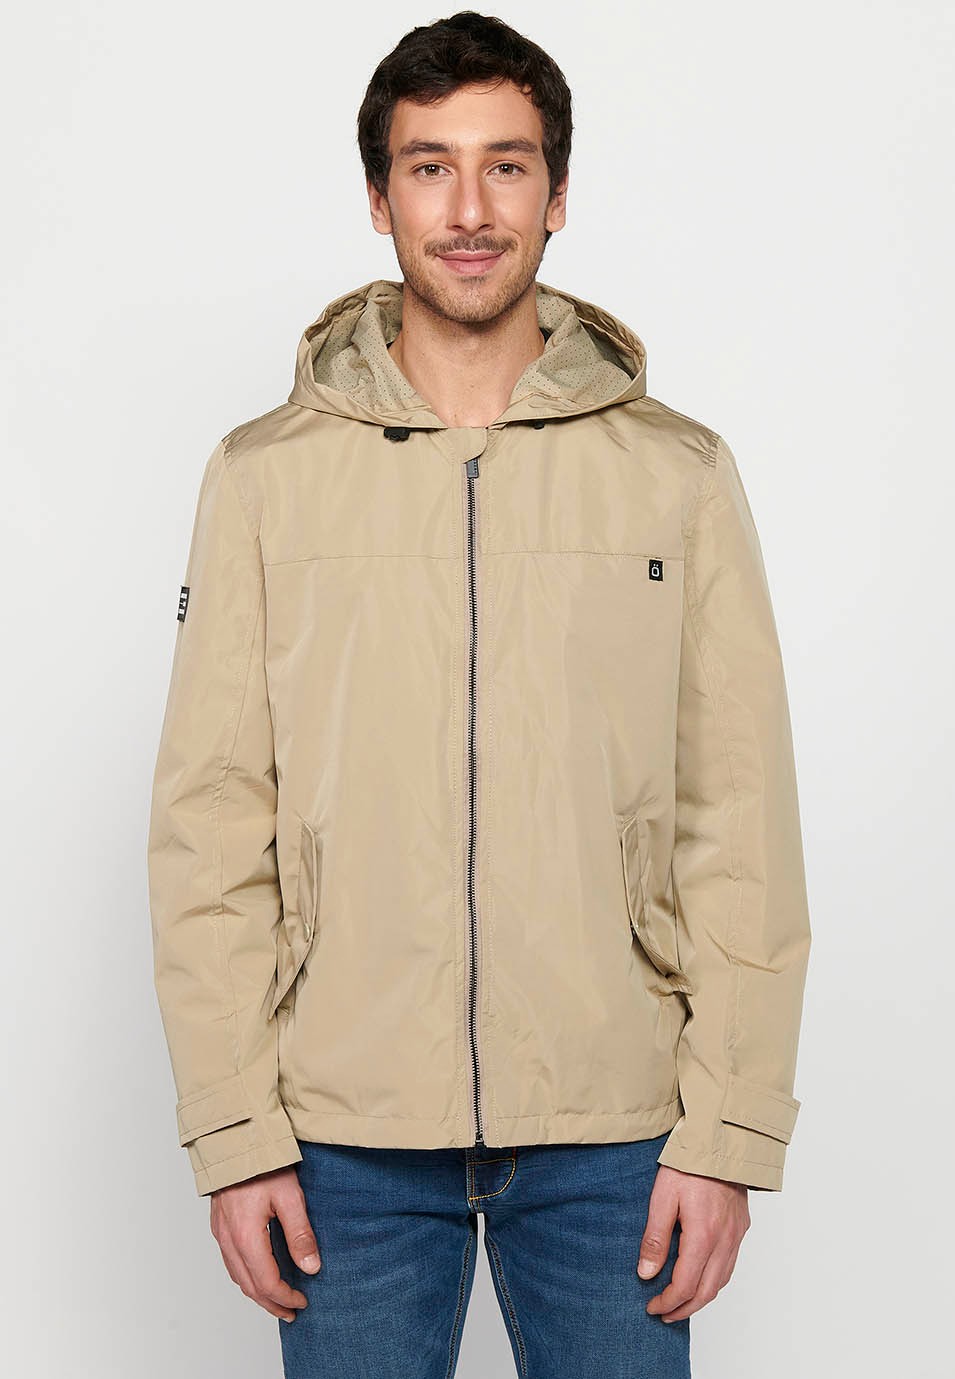 Water Repellent Jacket with Hooded Collar and Front Zipper Closure, Beige Pockets for Men 2